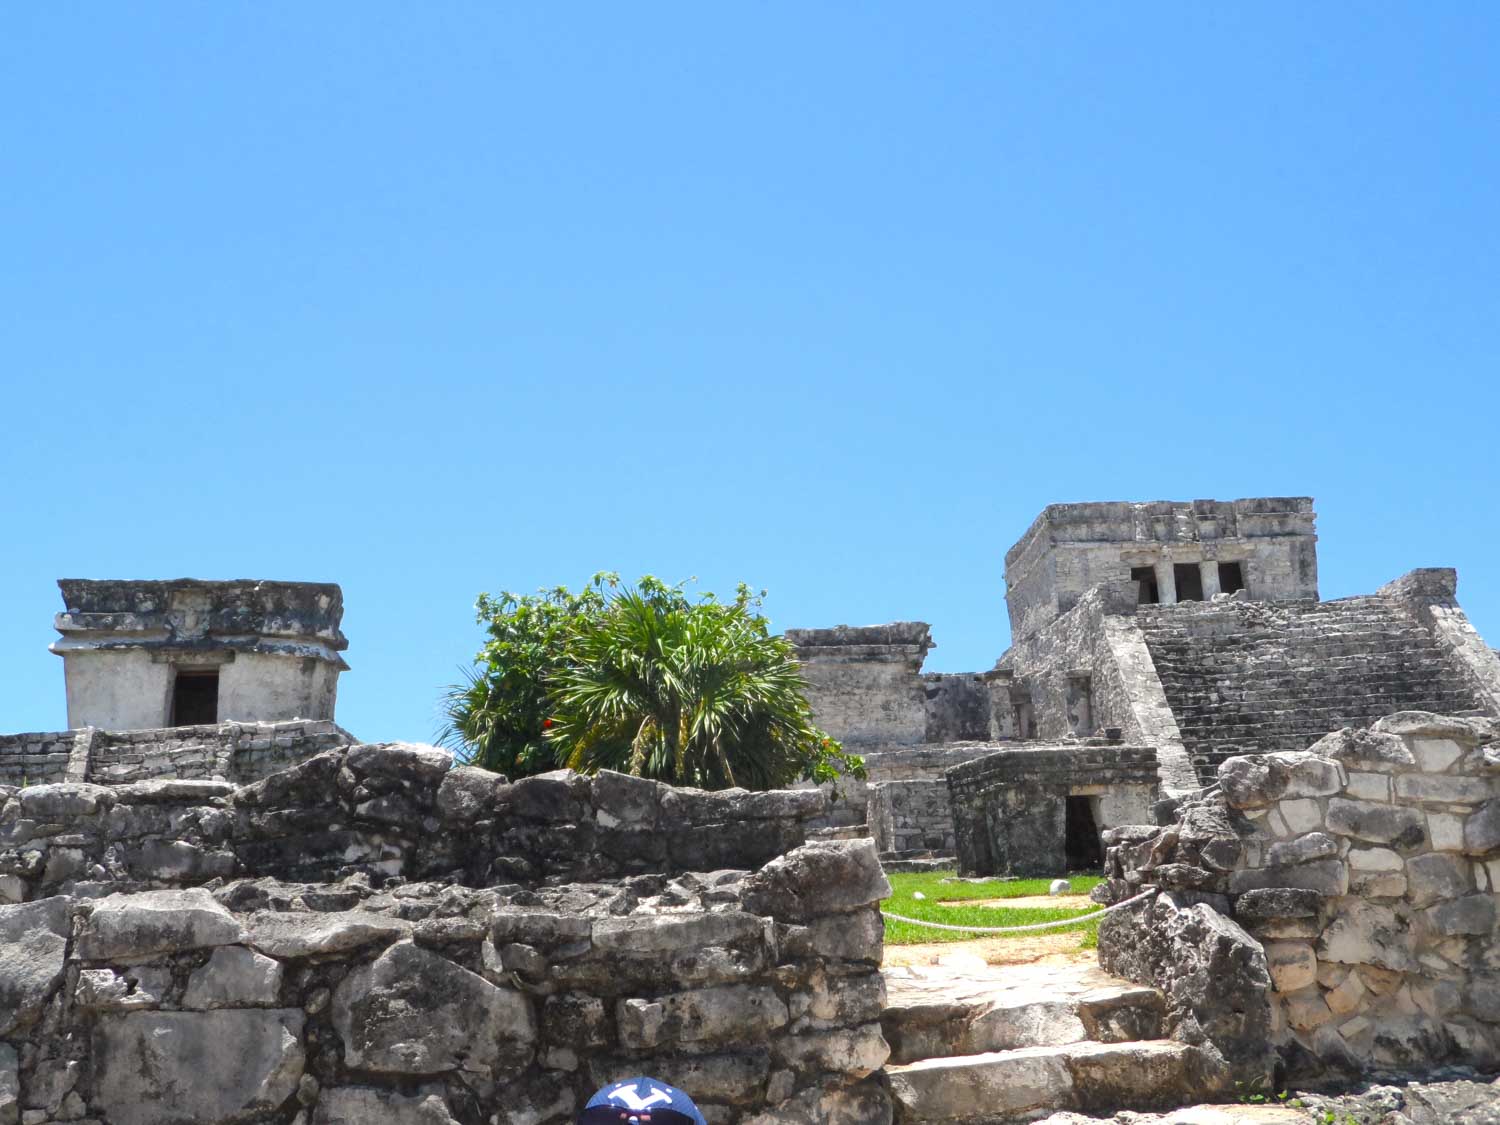 Tulum Mayan Ruins Express Early Half | Group Discount Rate $145.US dollars per person